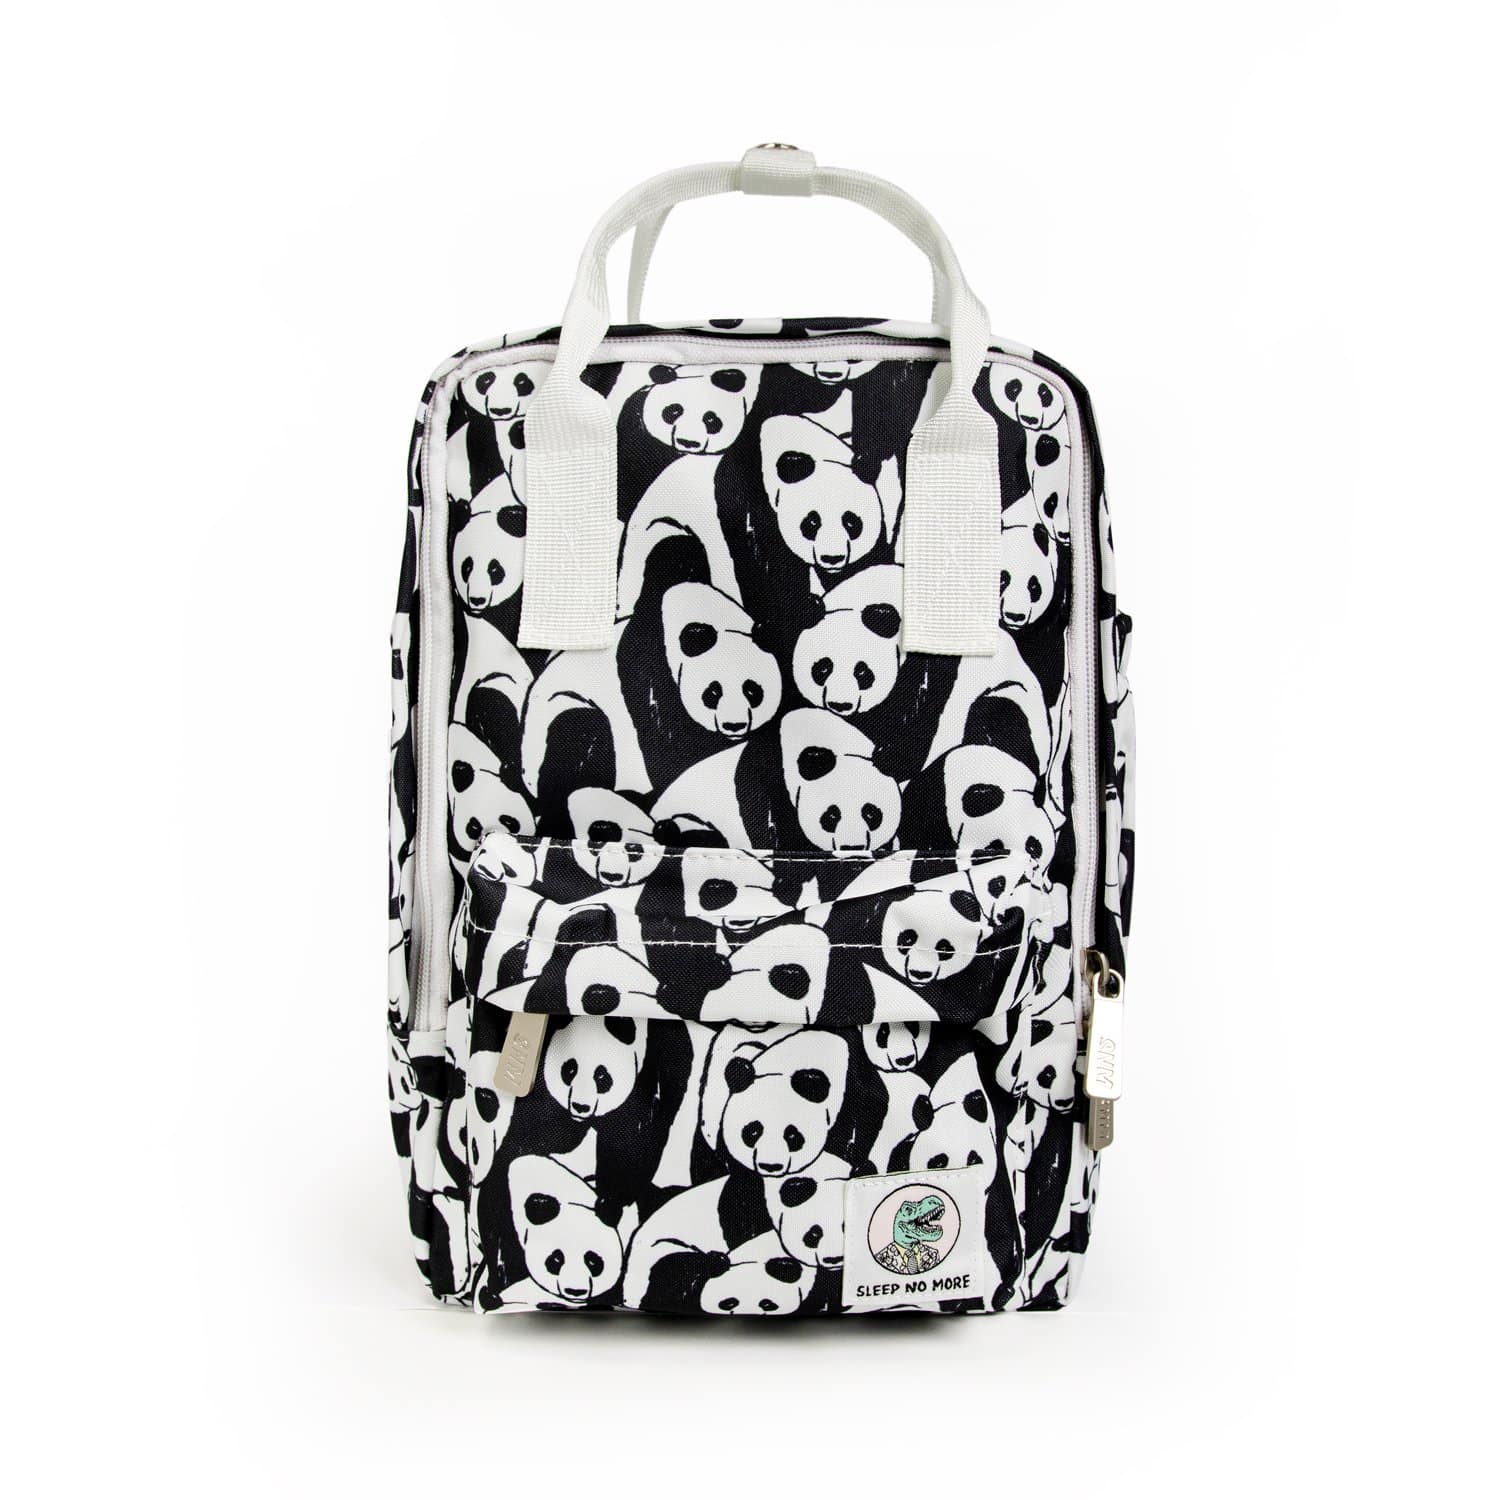 Sleep-No-More Non-Toxic Kids Backpack Panda from Gimme the Good Stuff